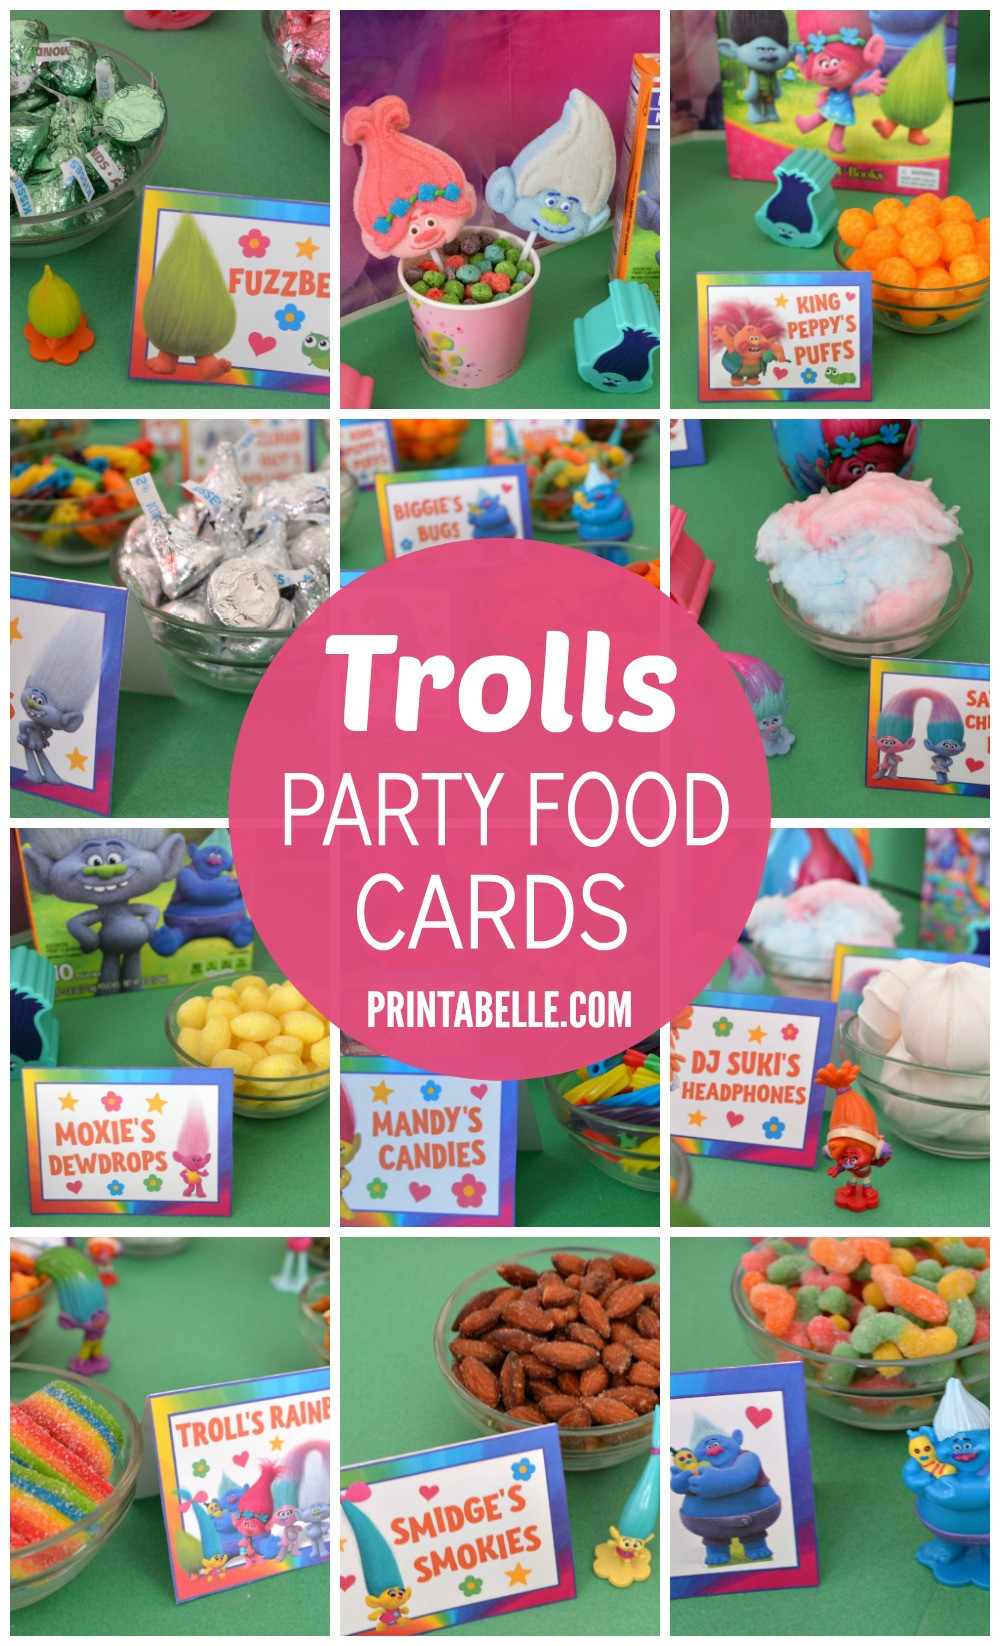 Trolls Birthday Party Ideas For Food
 Trolls Party Food Card Set – Free Party Printables at